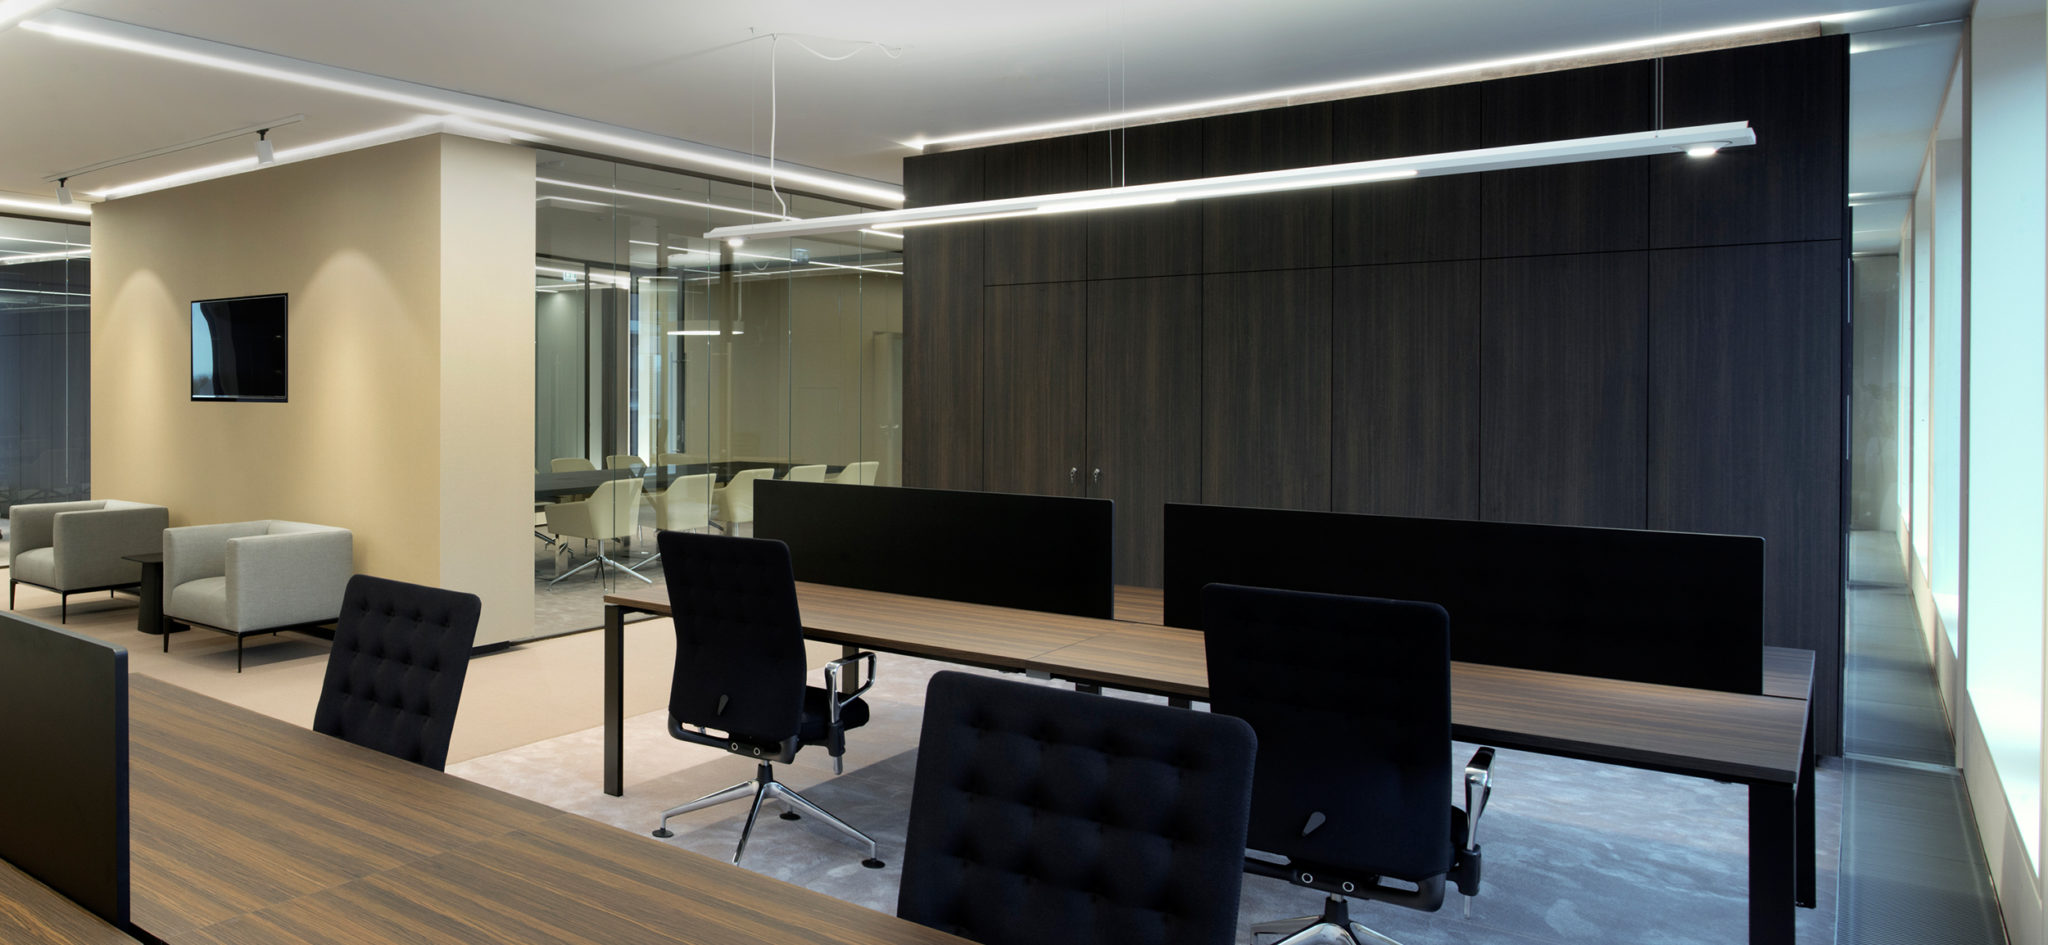 Custom furniture for an office in Luxembourg, JFPE - 